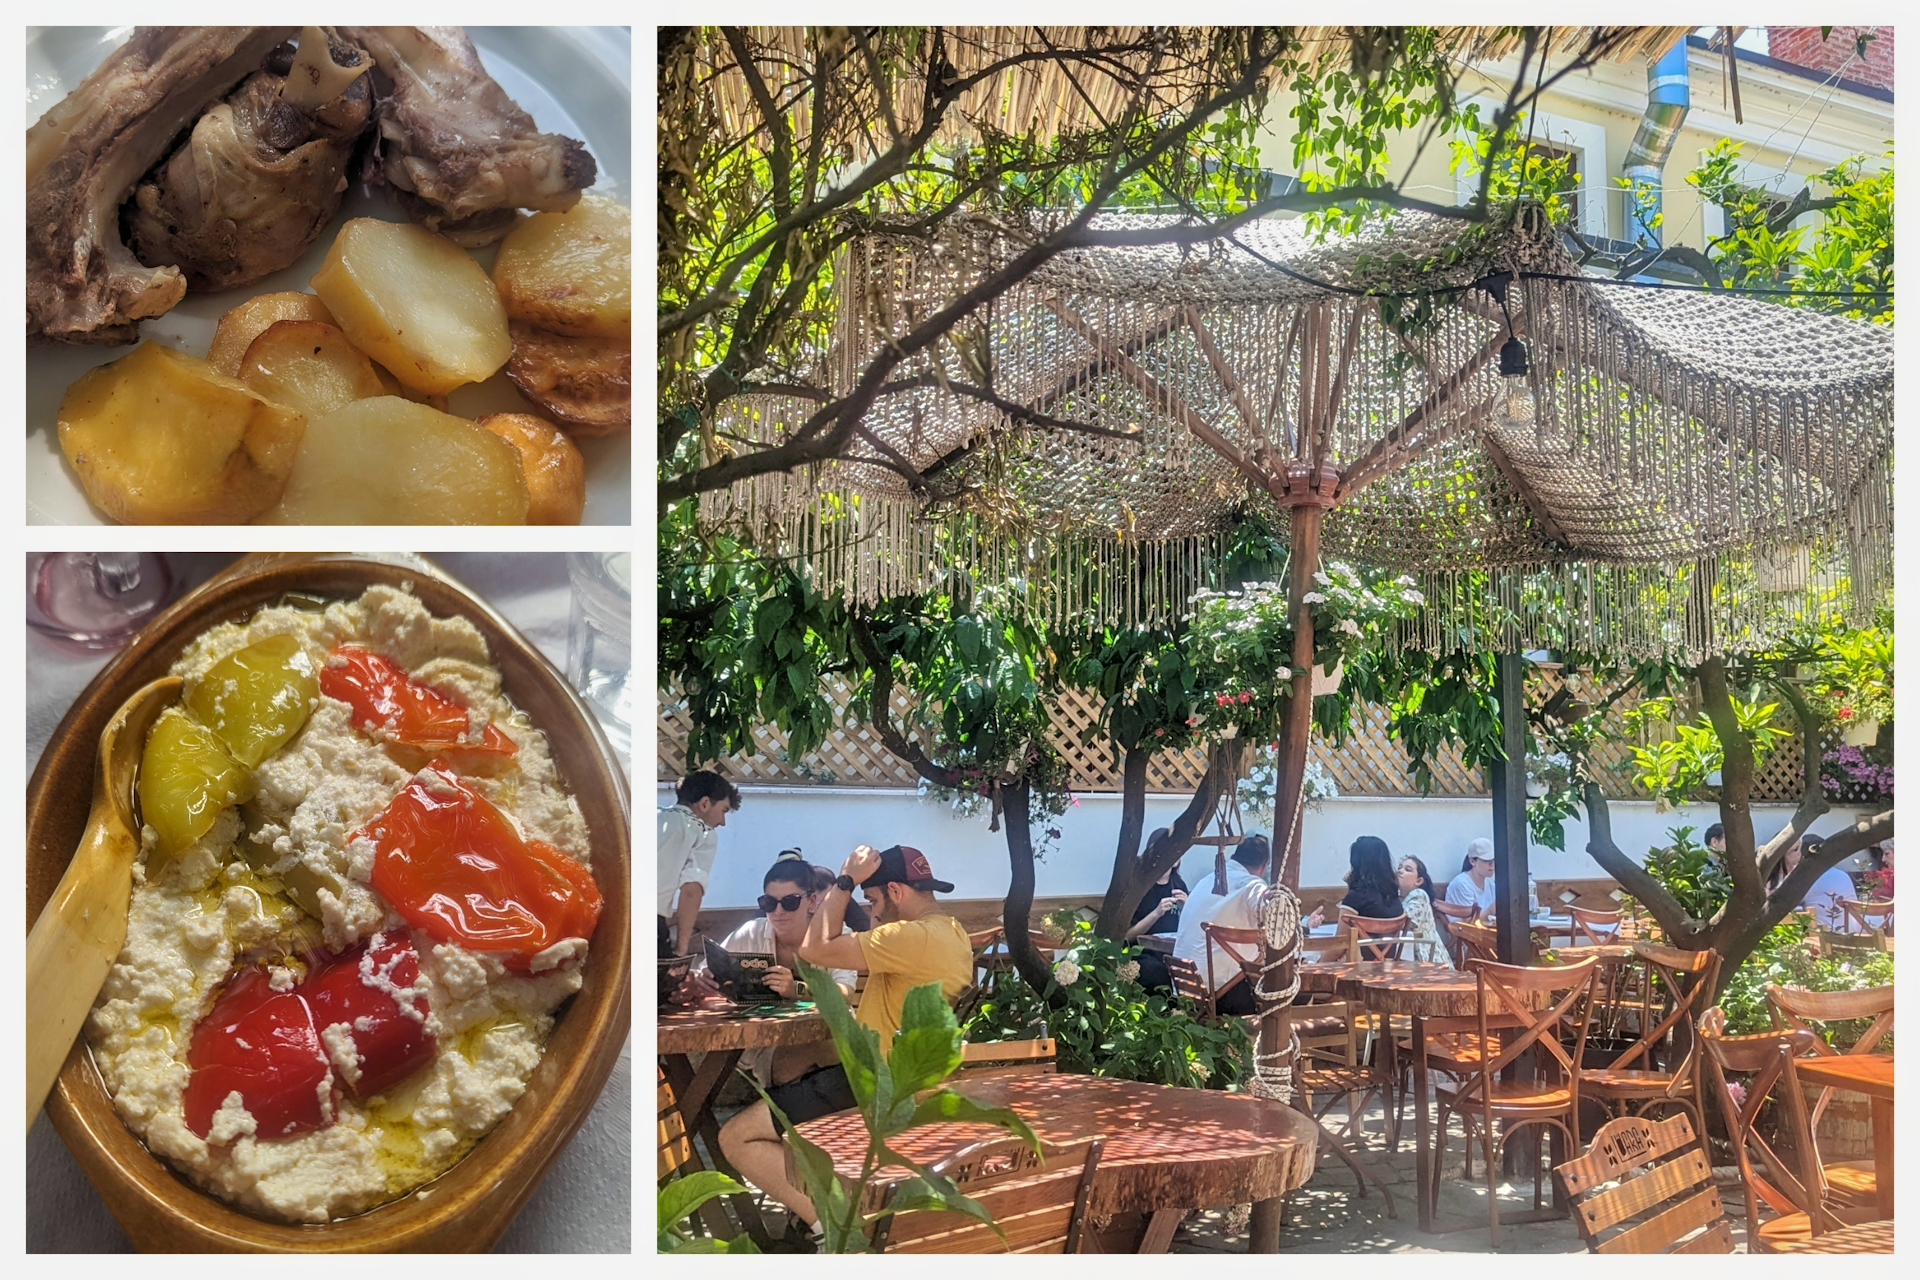 Lunch at a lush outdoor terrace in Tirana